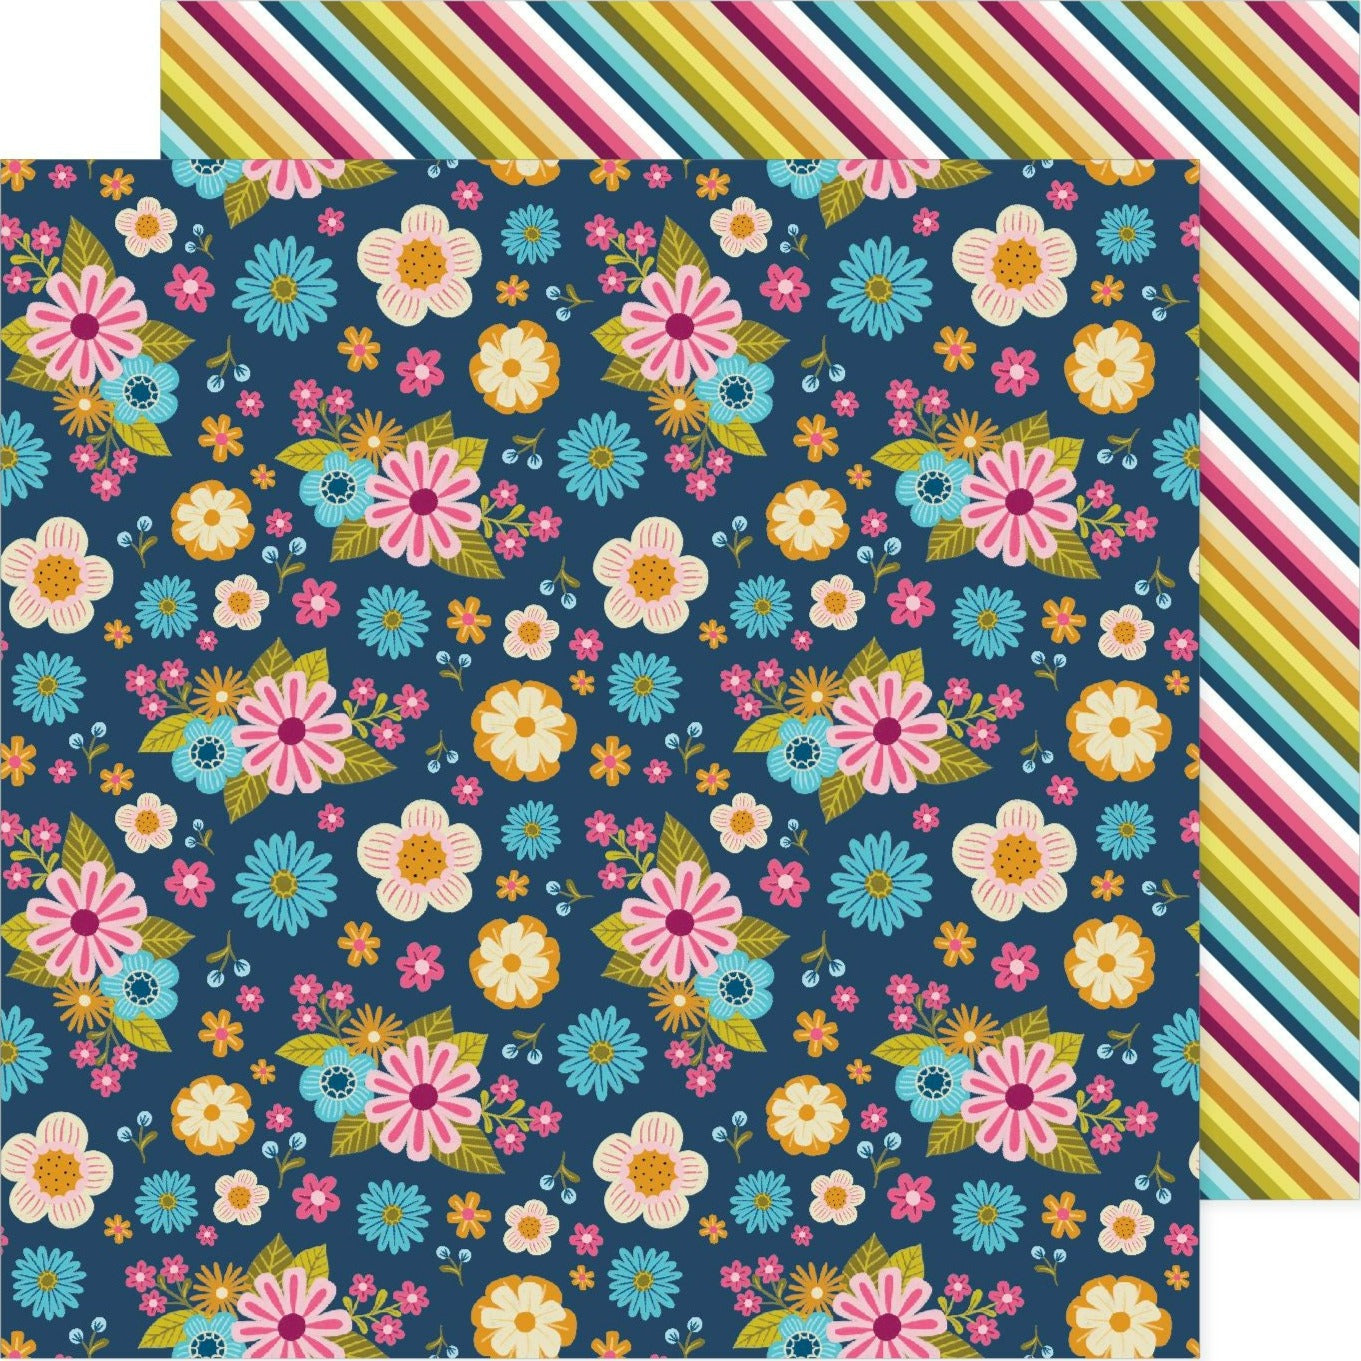 Pink Paislee's double-sided 12x12 paper features a navy blue background adorned with whimsical pink, blue, and orange flowers with green leaves on one side and diagonal stripes in matching colors on the other.